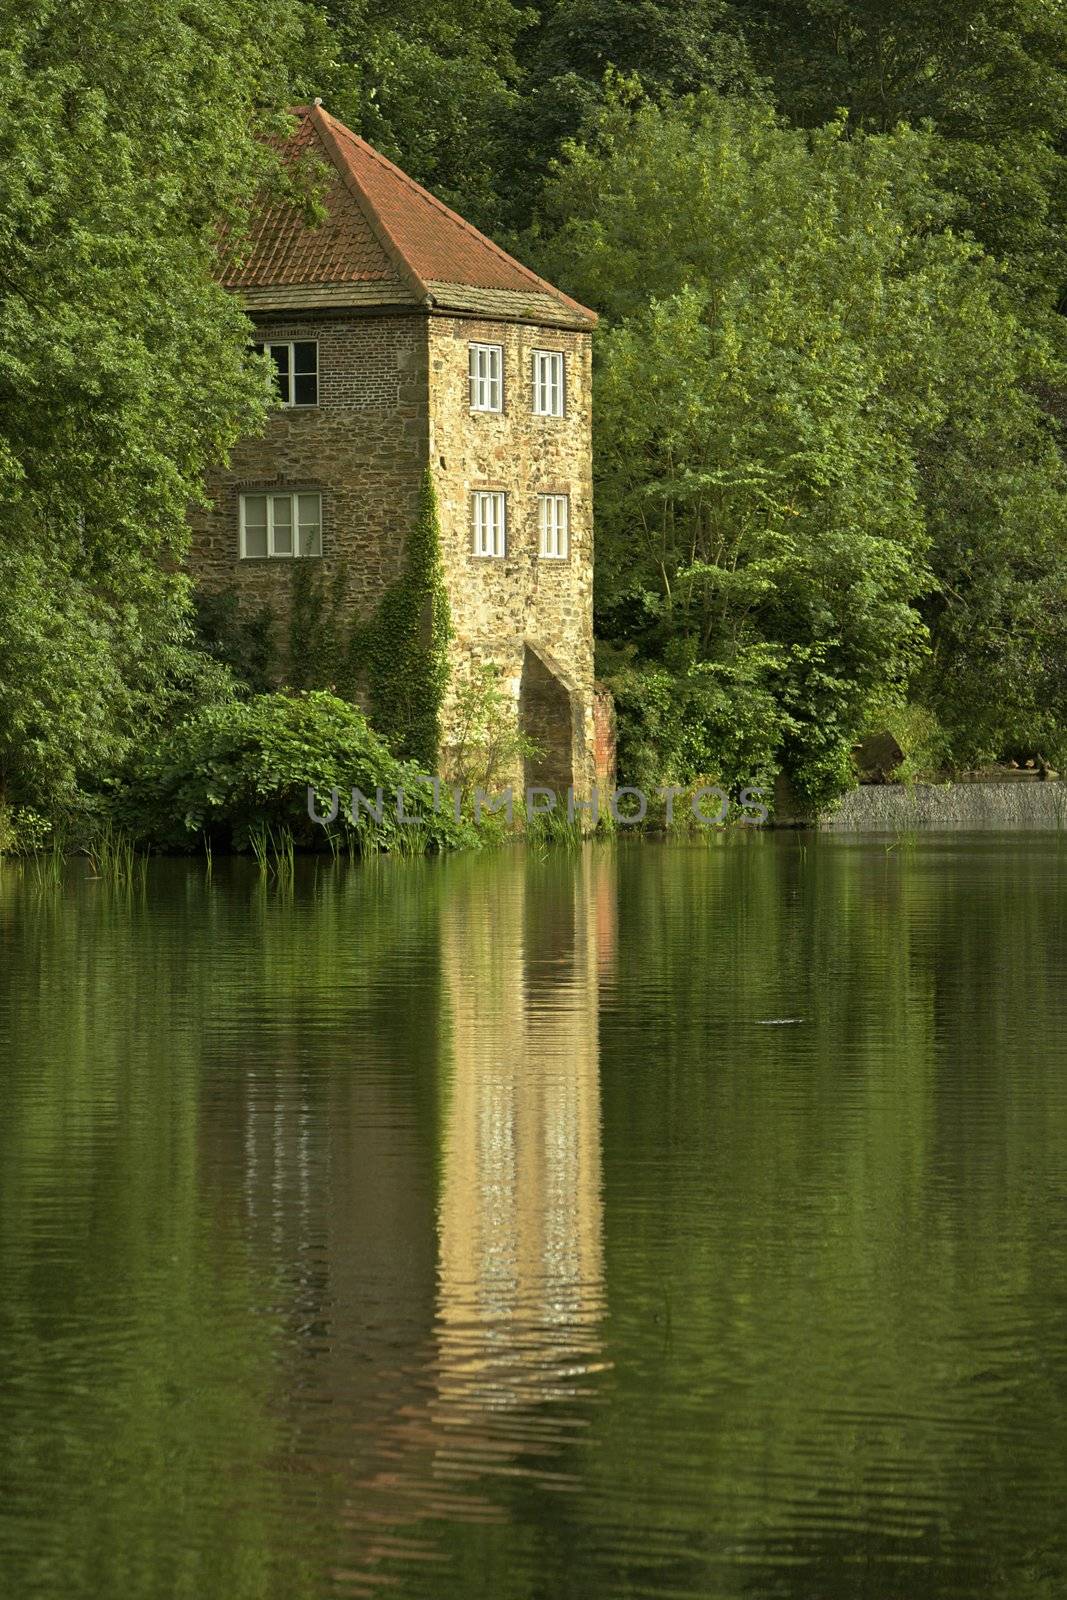 Durham, old pump house on river bank in England